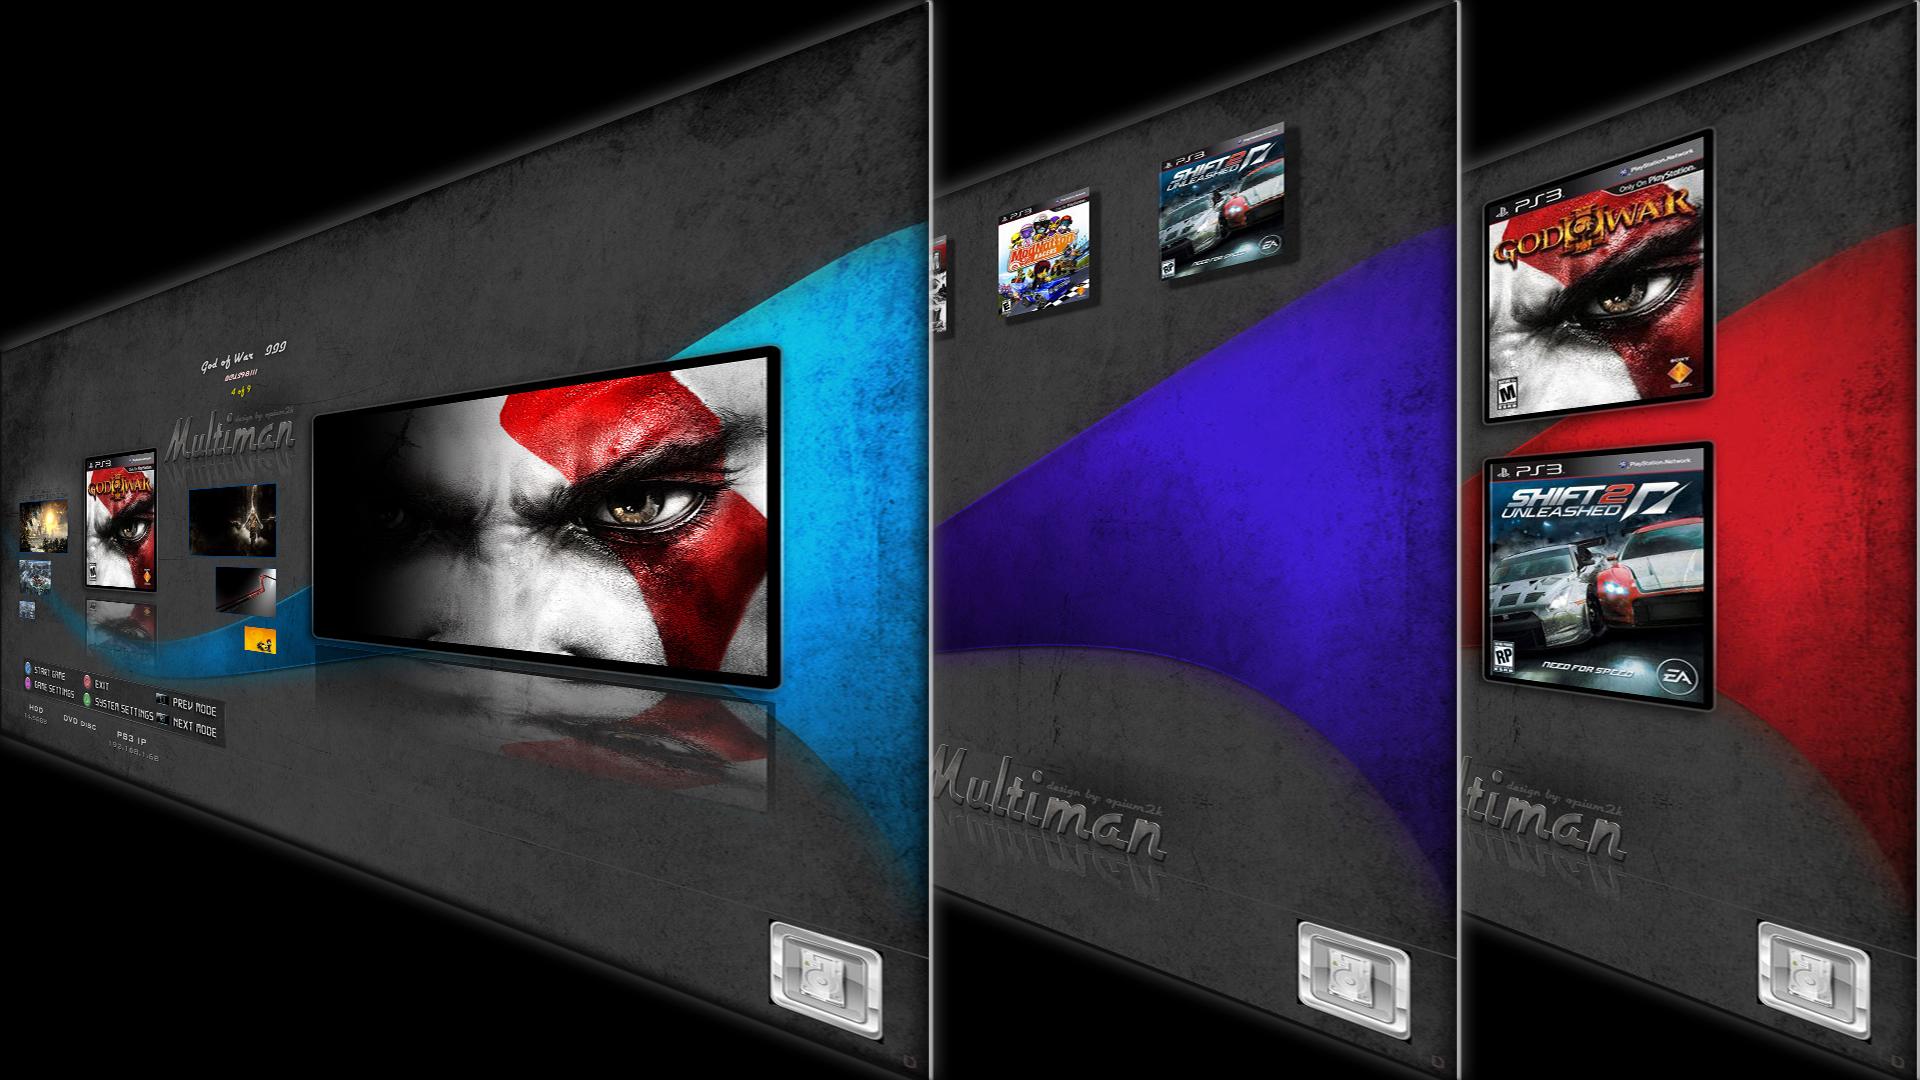 Playstation 3 Theme Depository - Themes for PS3 software and more ...